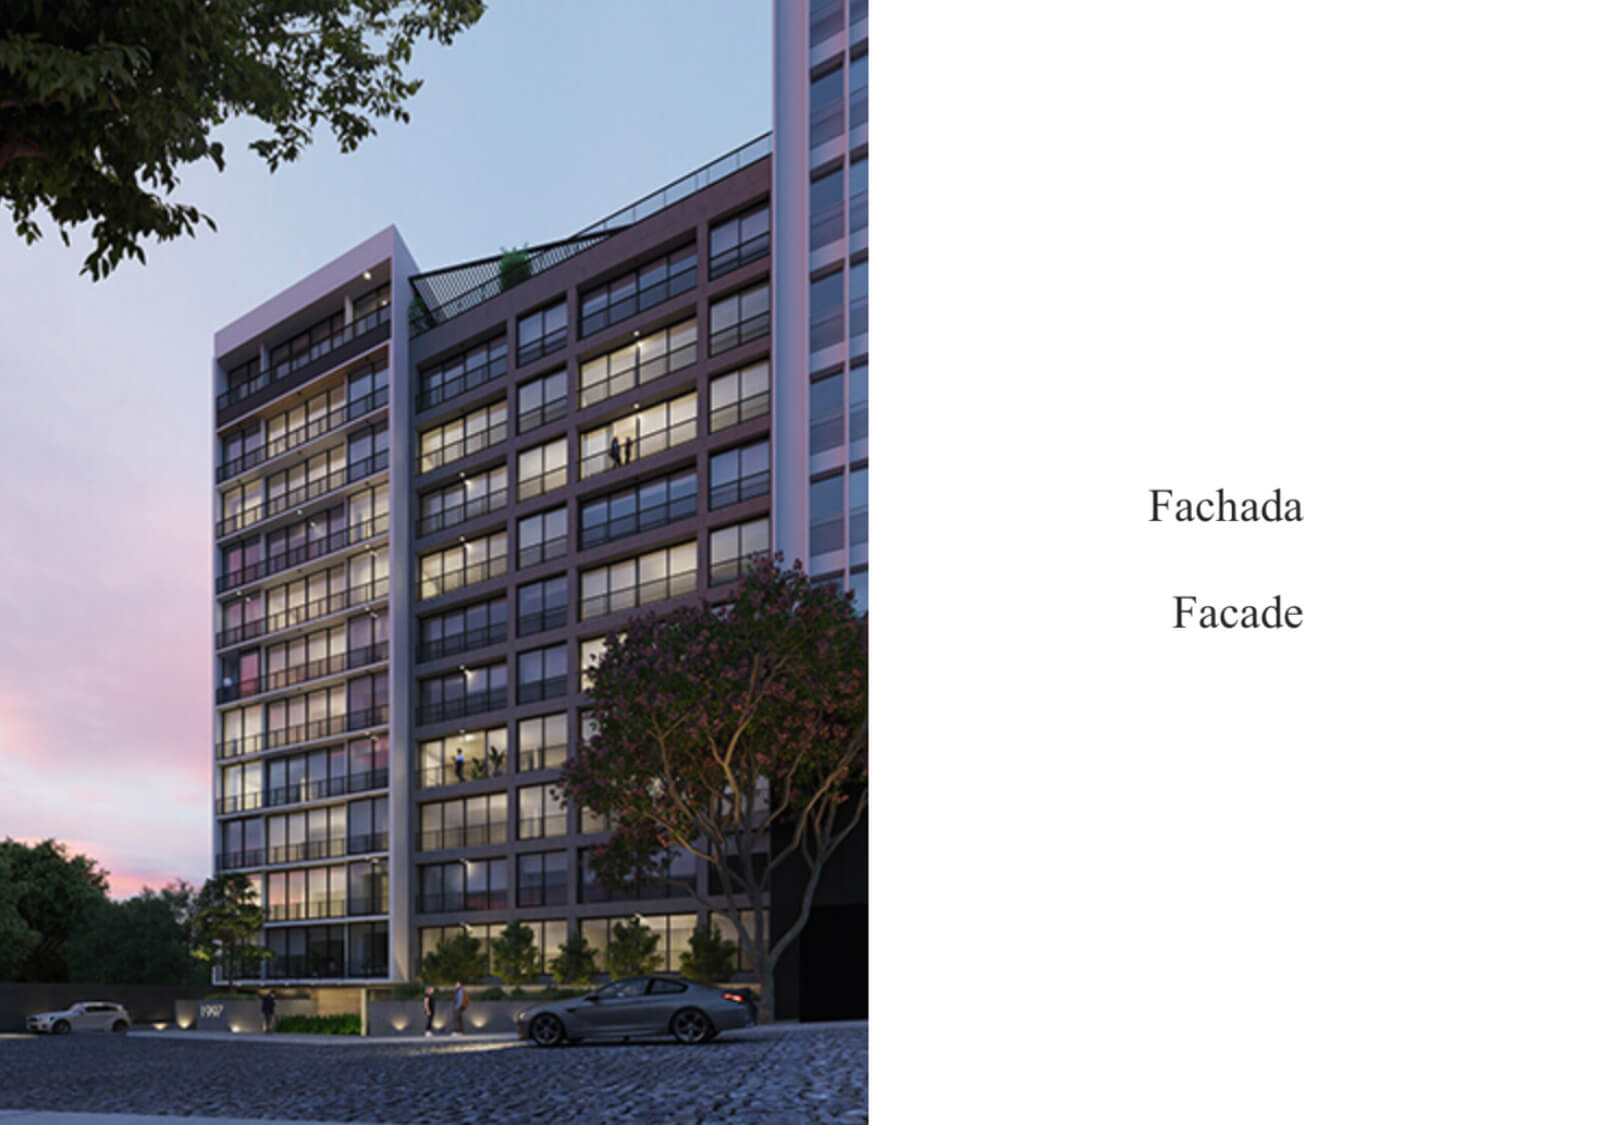 All bedrooms have private balcony, condo with amenity terrace on top floor, elevator, pre-construction, for sale, Jardines de Guadalupe, Zap